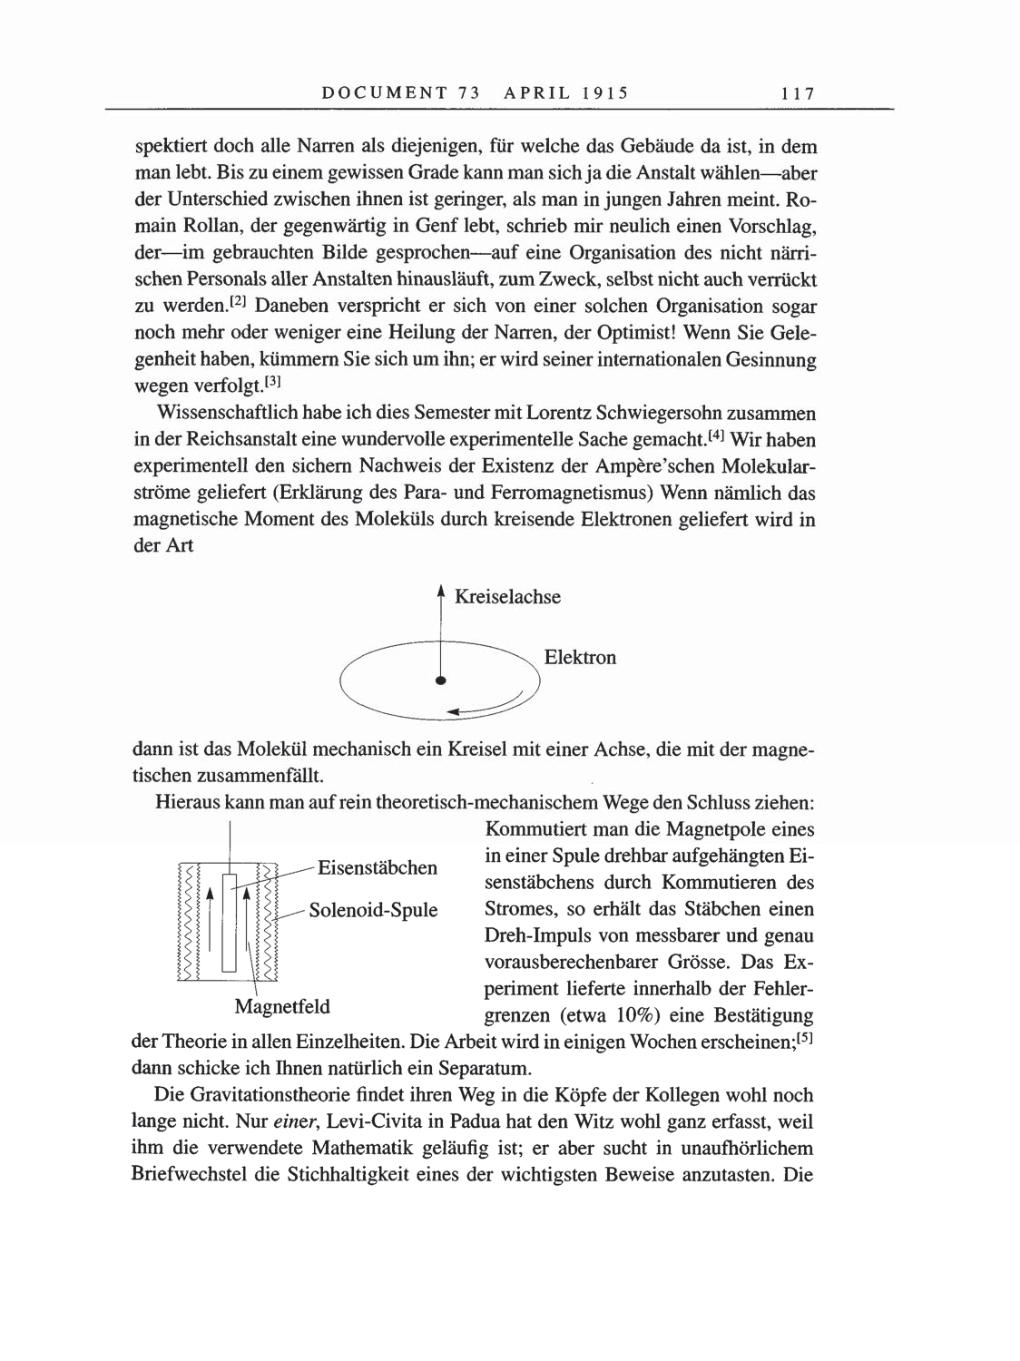 Volume 8, Part A: The Berlin Years: Correspondence 1914-1917 page 117